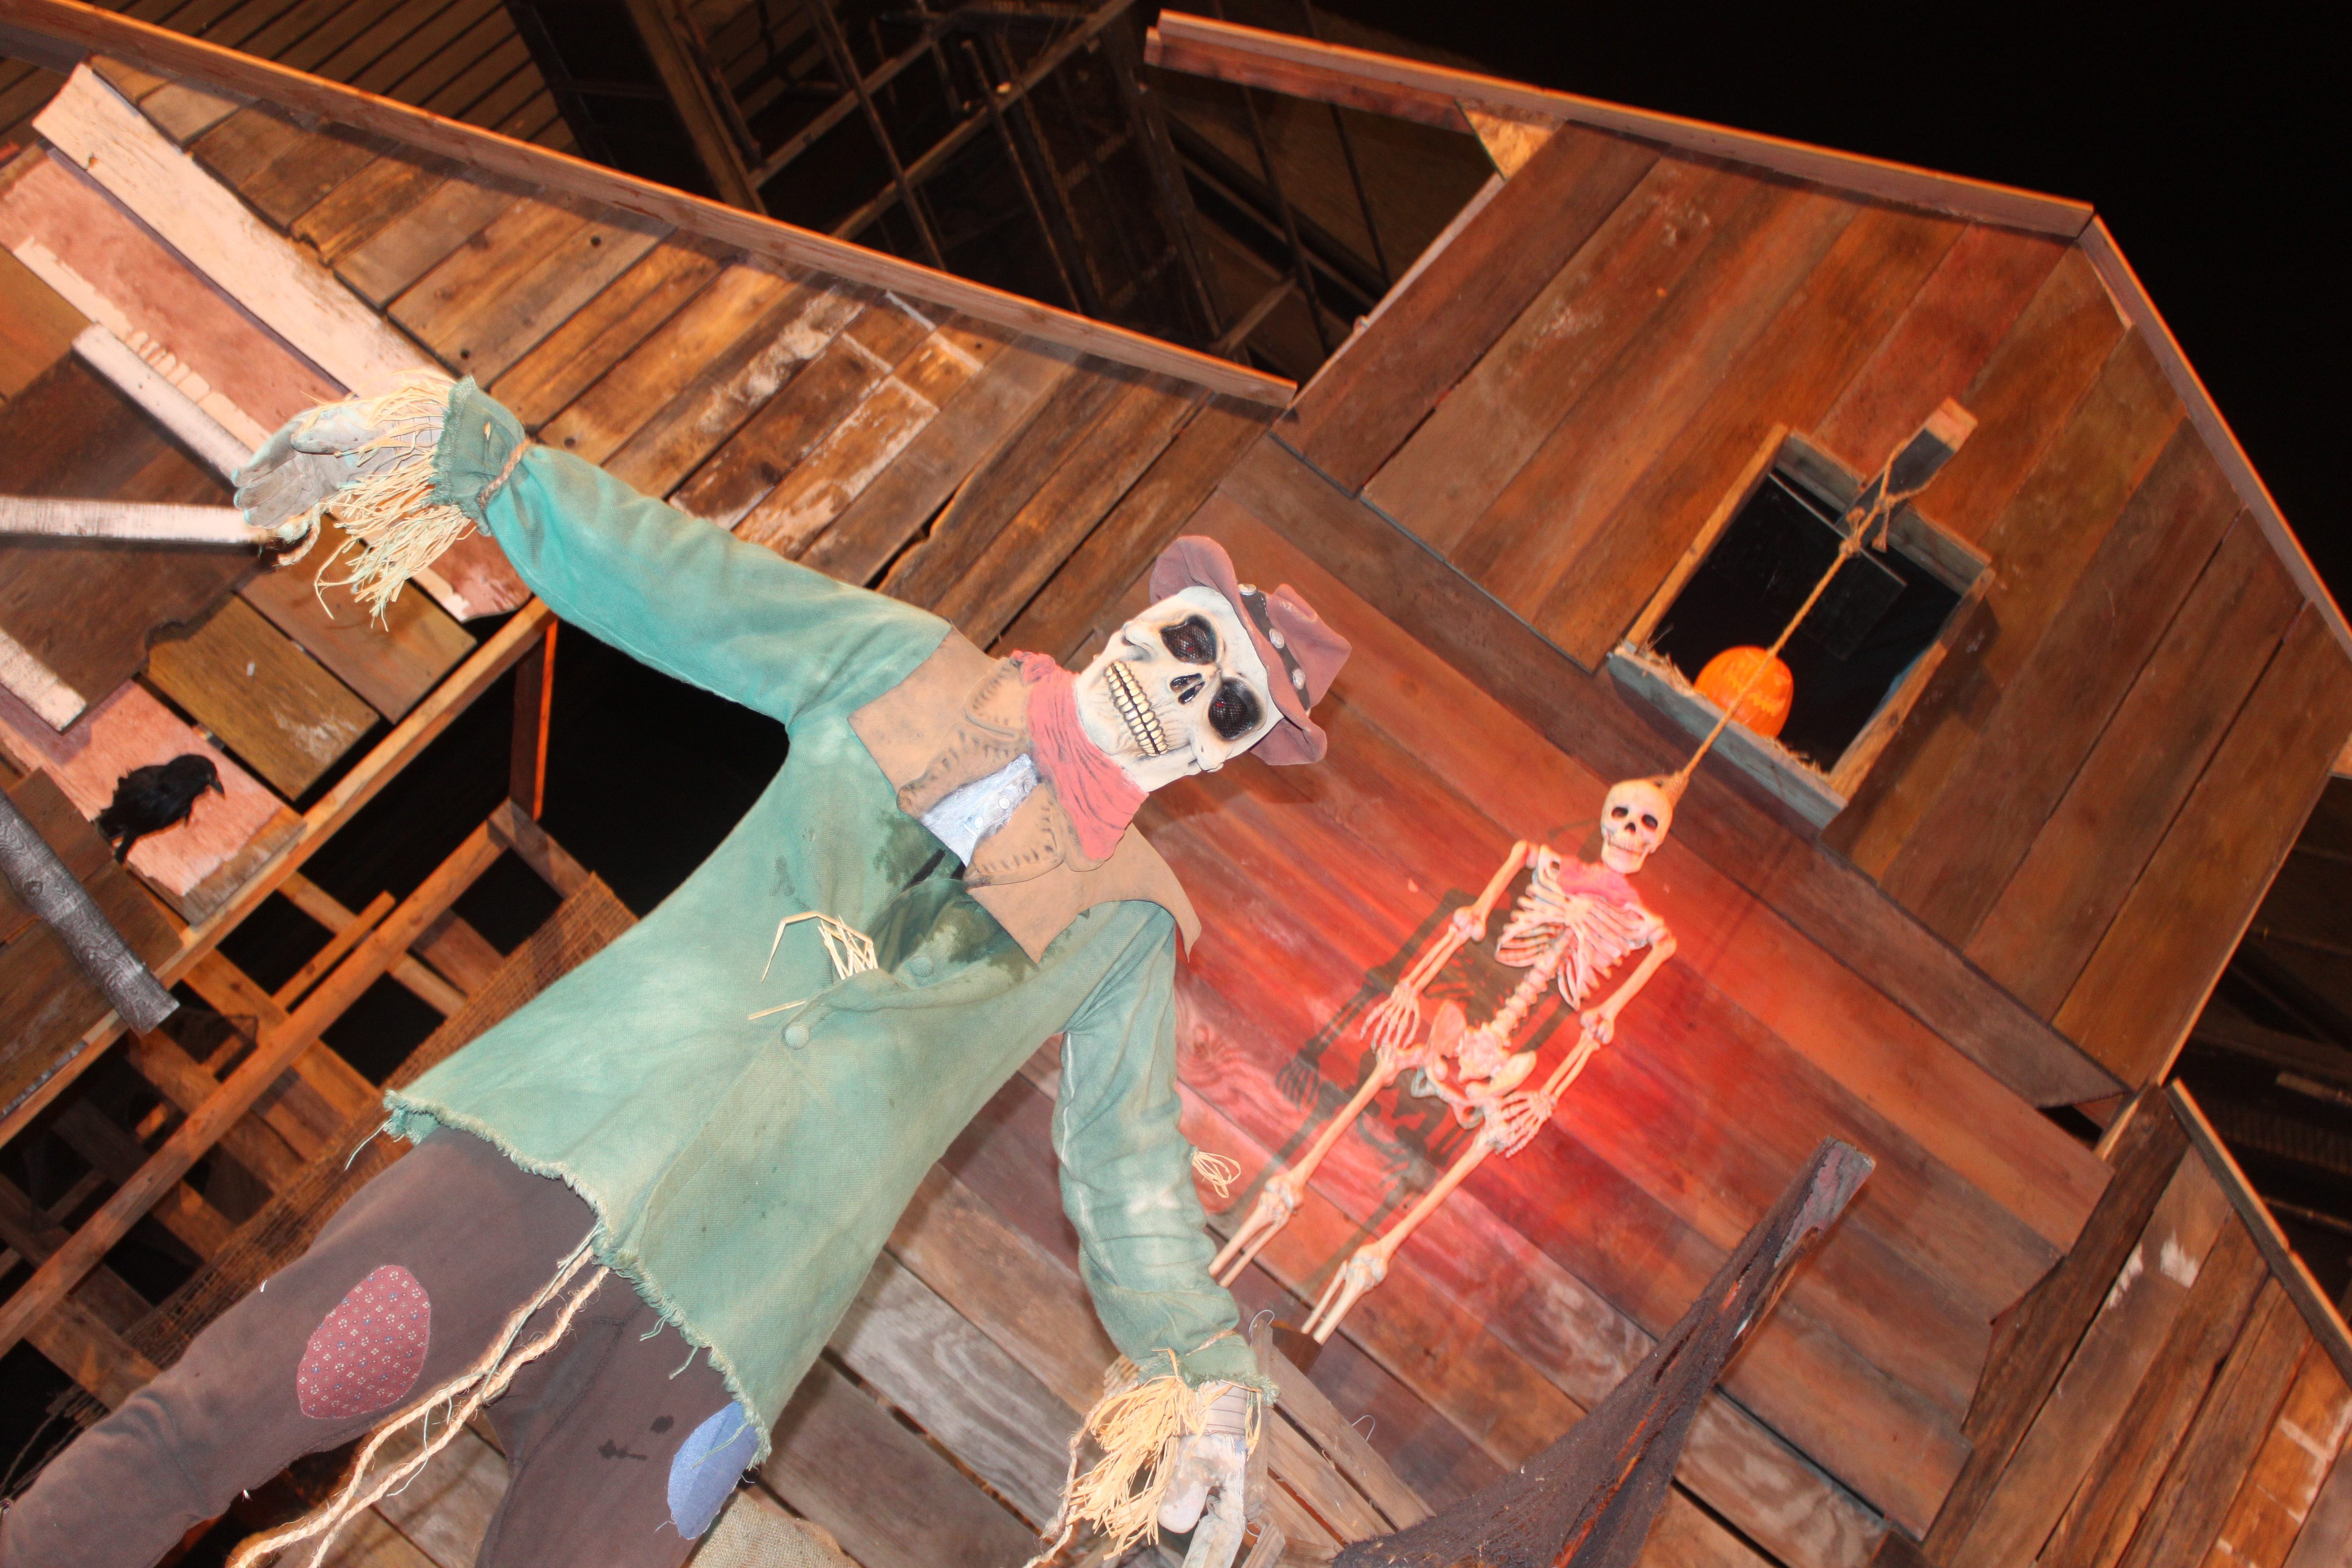 Haunted house returning to Festival Theater